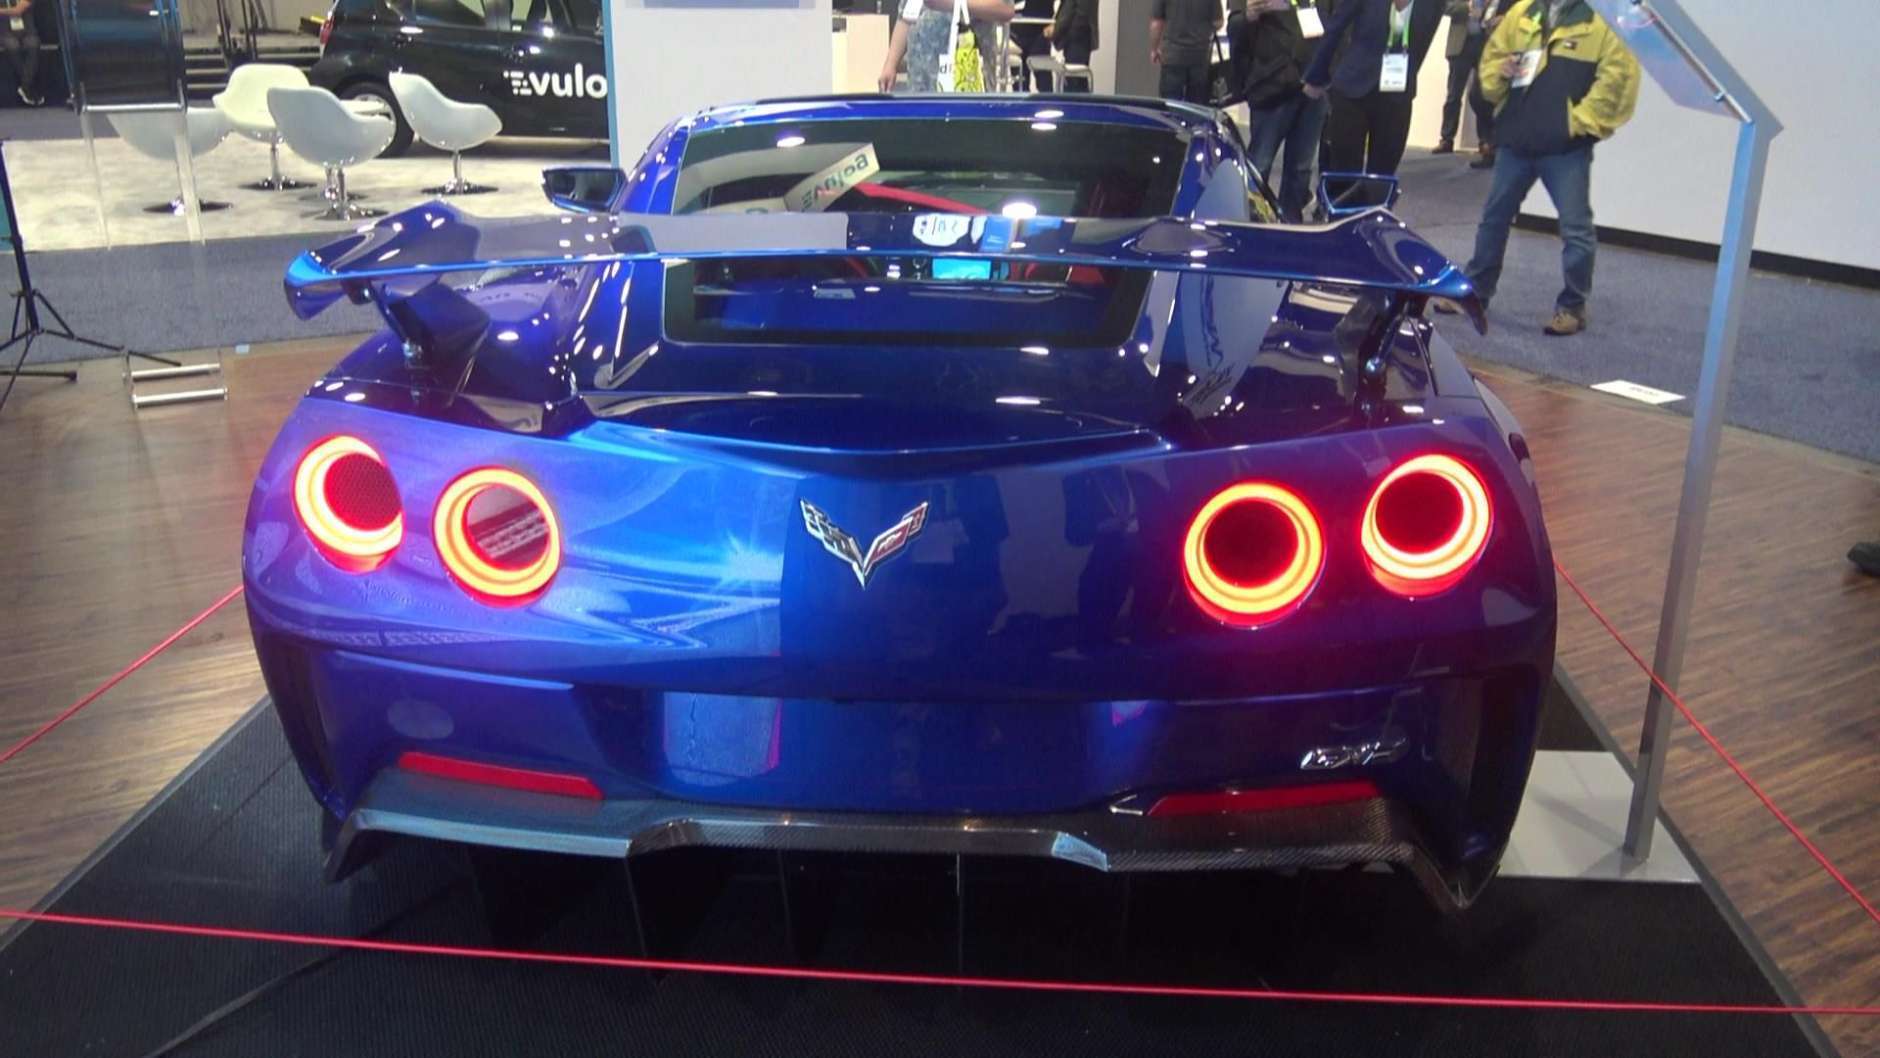 The electric Corvette was showcased at the 2018 CES in Las Vegas.(Courtesy Kenny Fried)